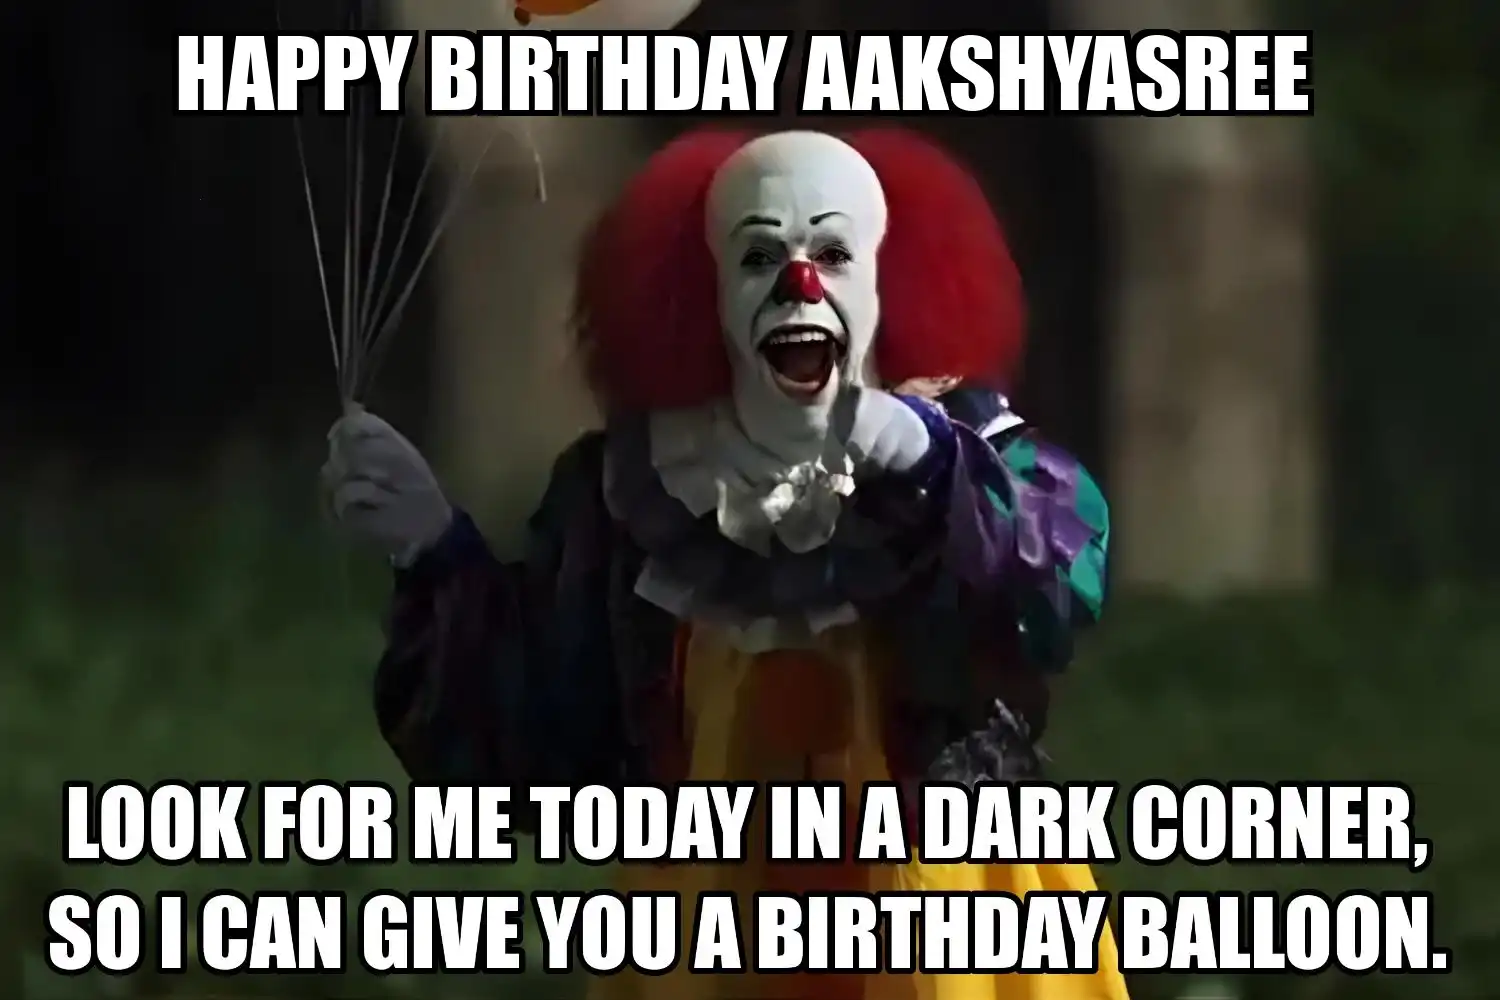 Happy Birthday Aakshyasree I Can Give You A Balloon Meme